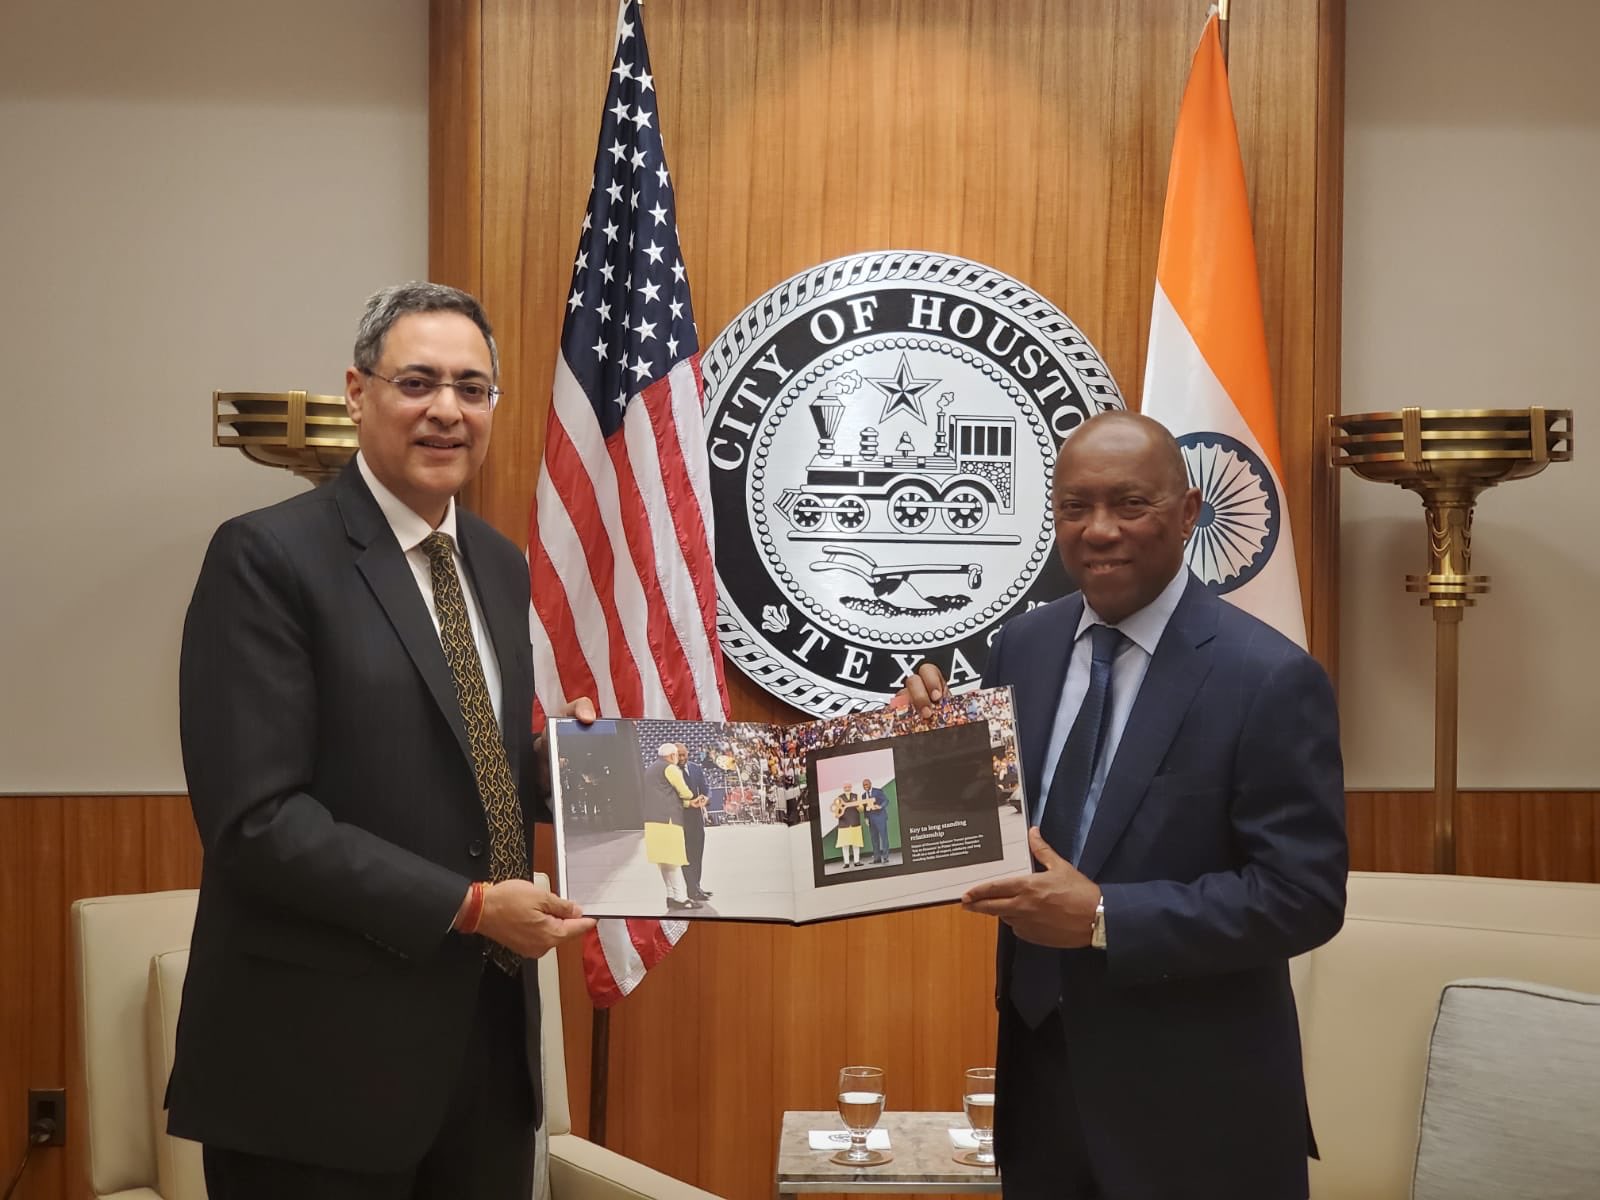 Consul General met Mayor of Houston Sylvester Turner and Discussed multifaceted ties between India and Houston on March 2, 2020